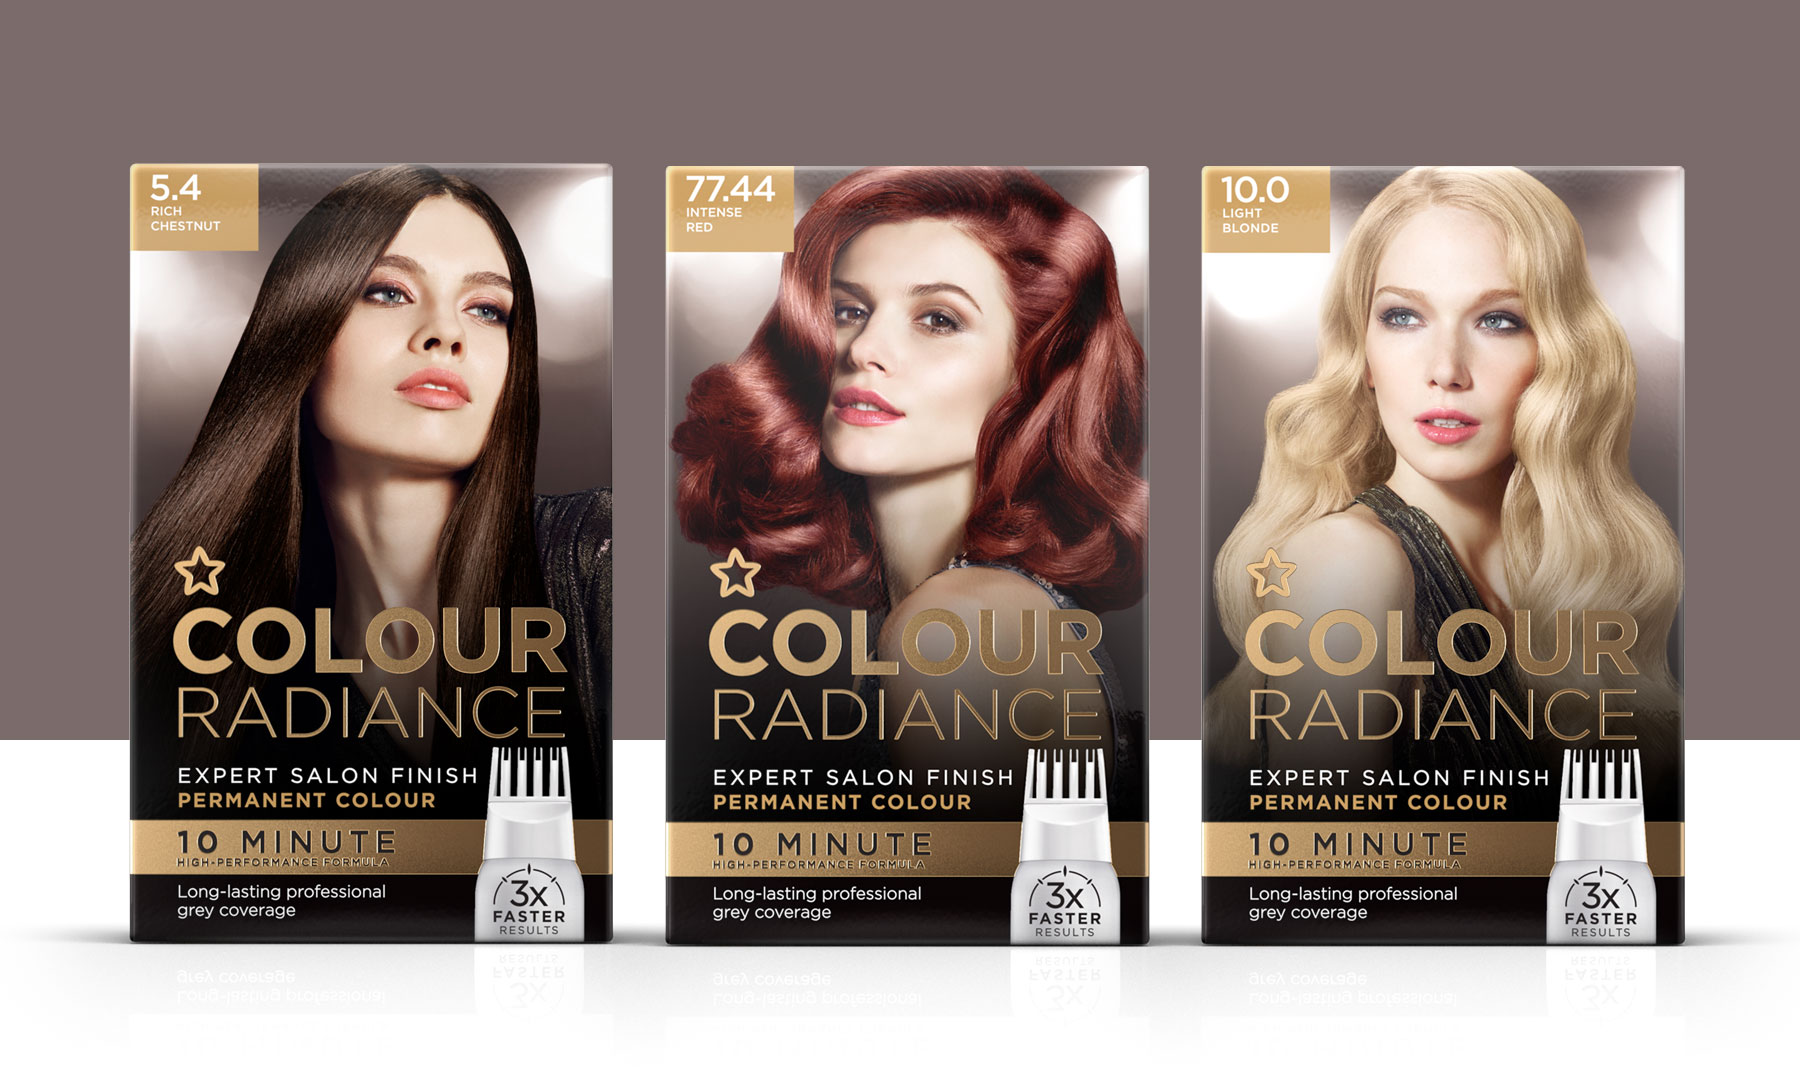 Superdrug colour radiance products on a grey putty background design by Biles Hendry